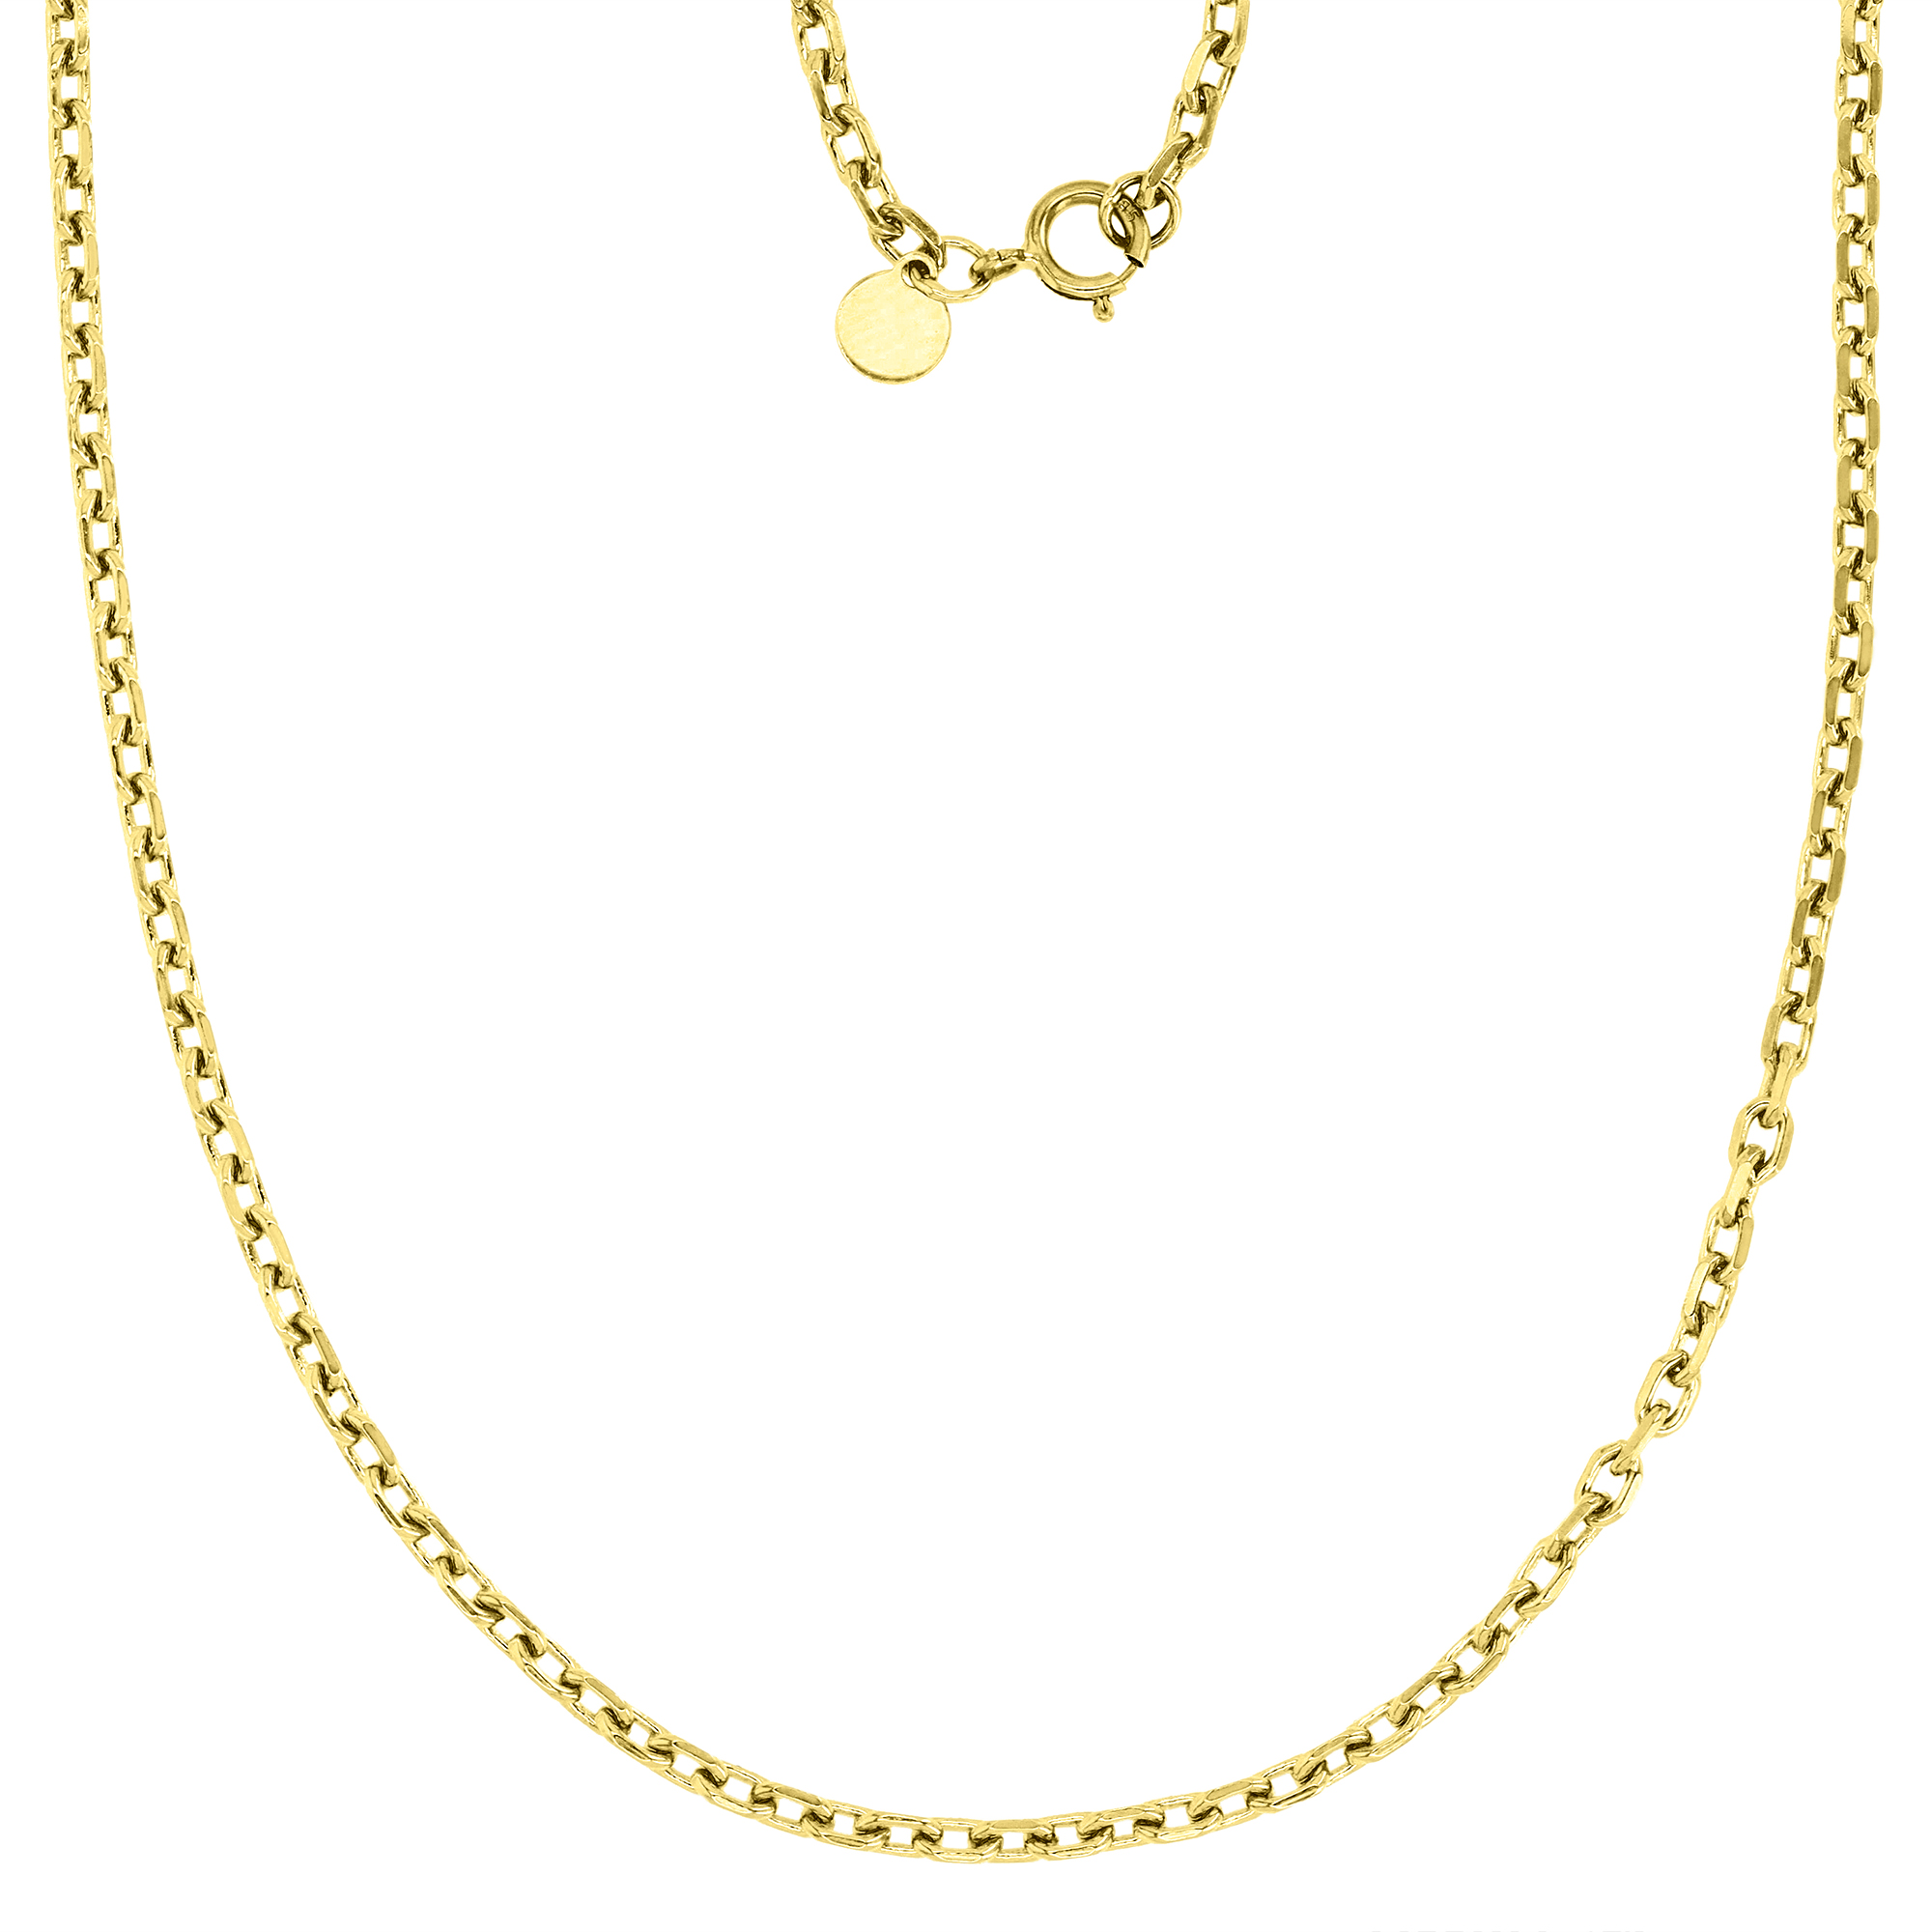 14K Yellow 1.4MM Polished & DC Prisma Oval Rollo Link 18" Chain